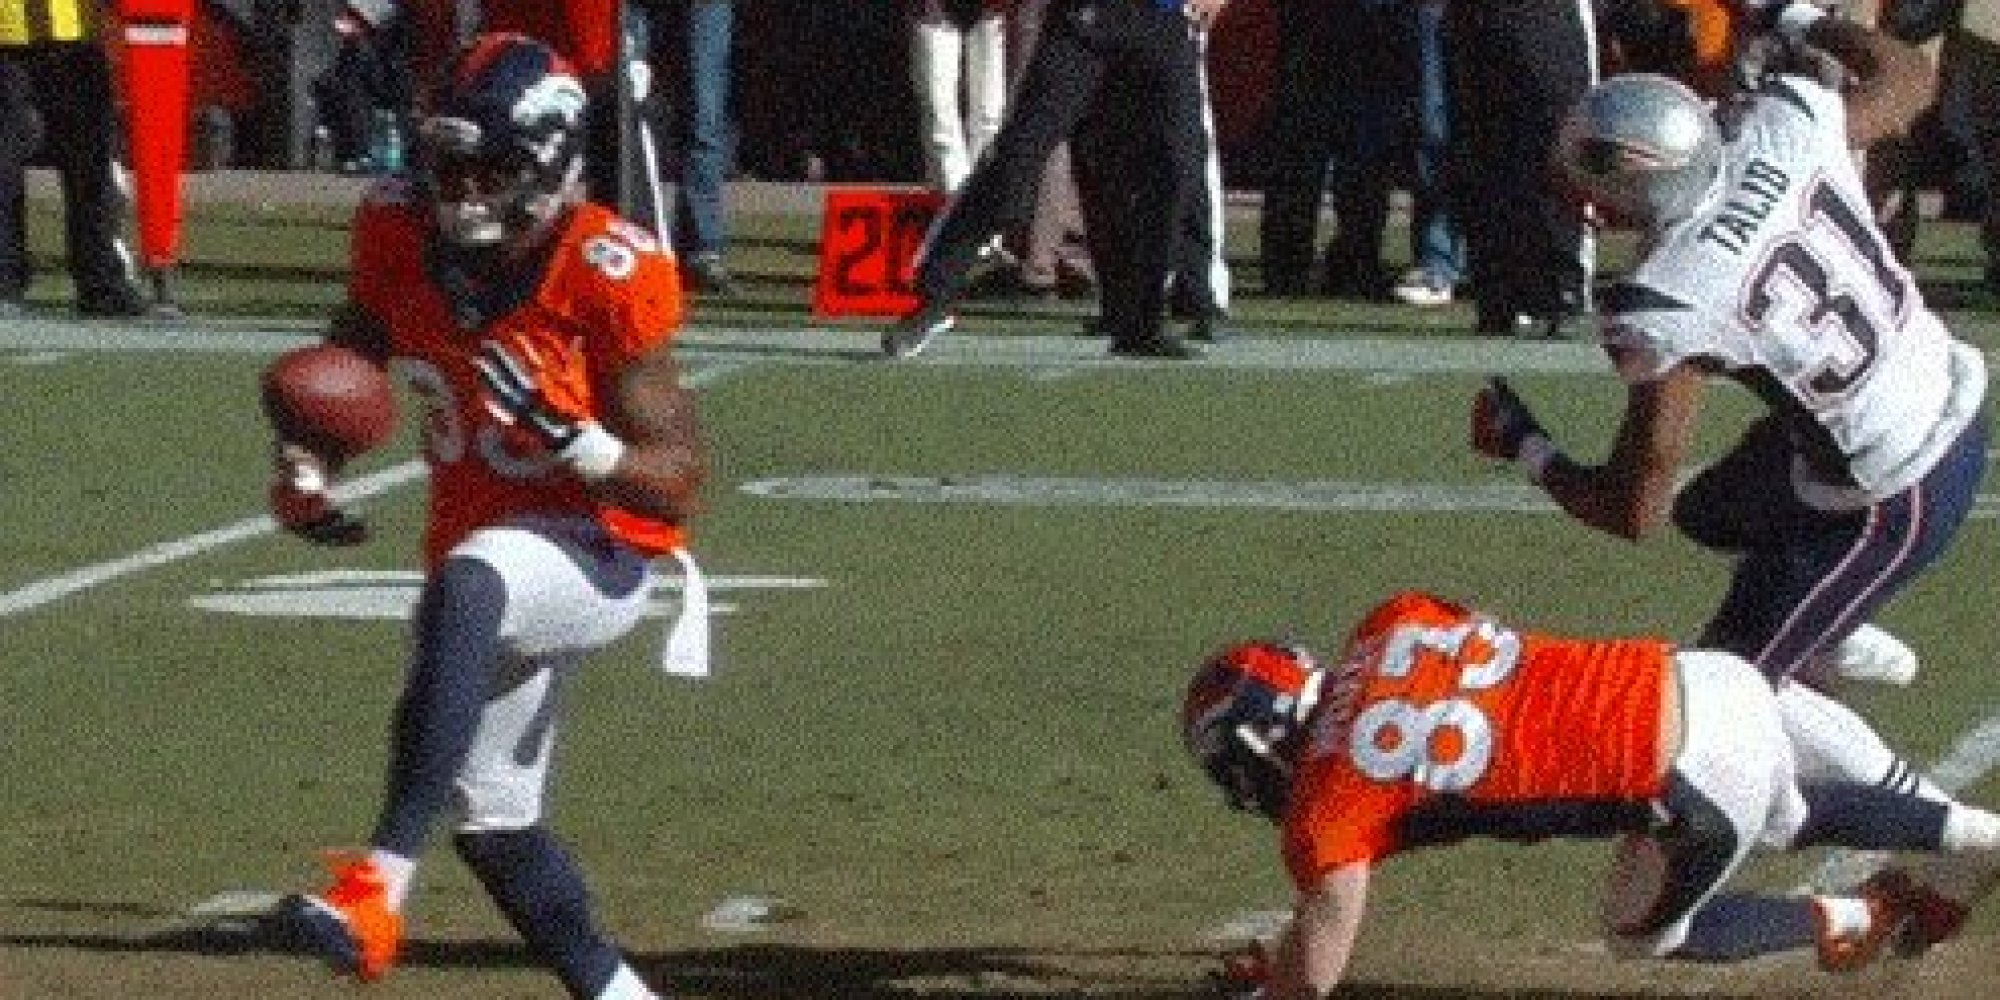 Wes Welker’s Move Not Intentional, But Cowardly